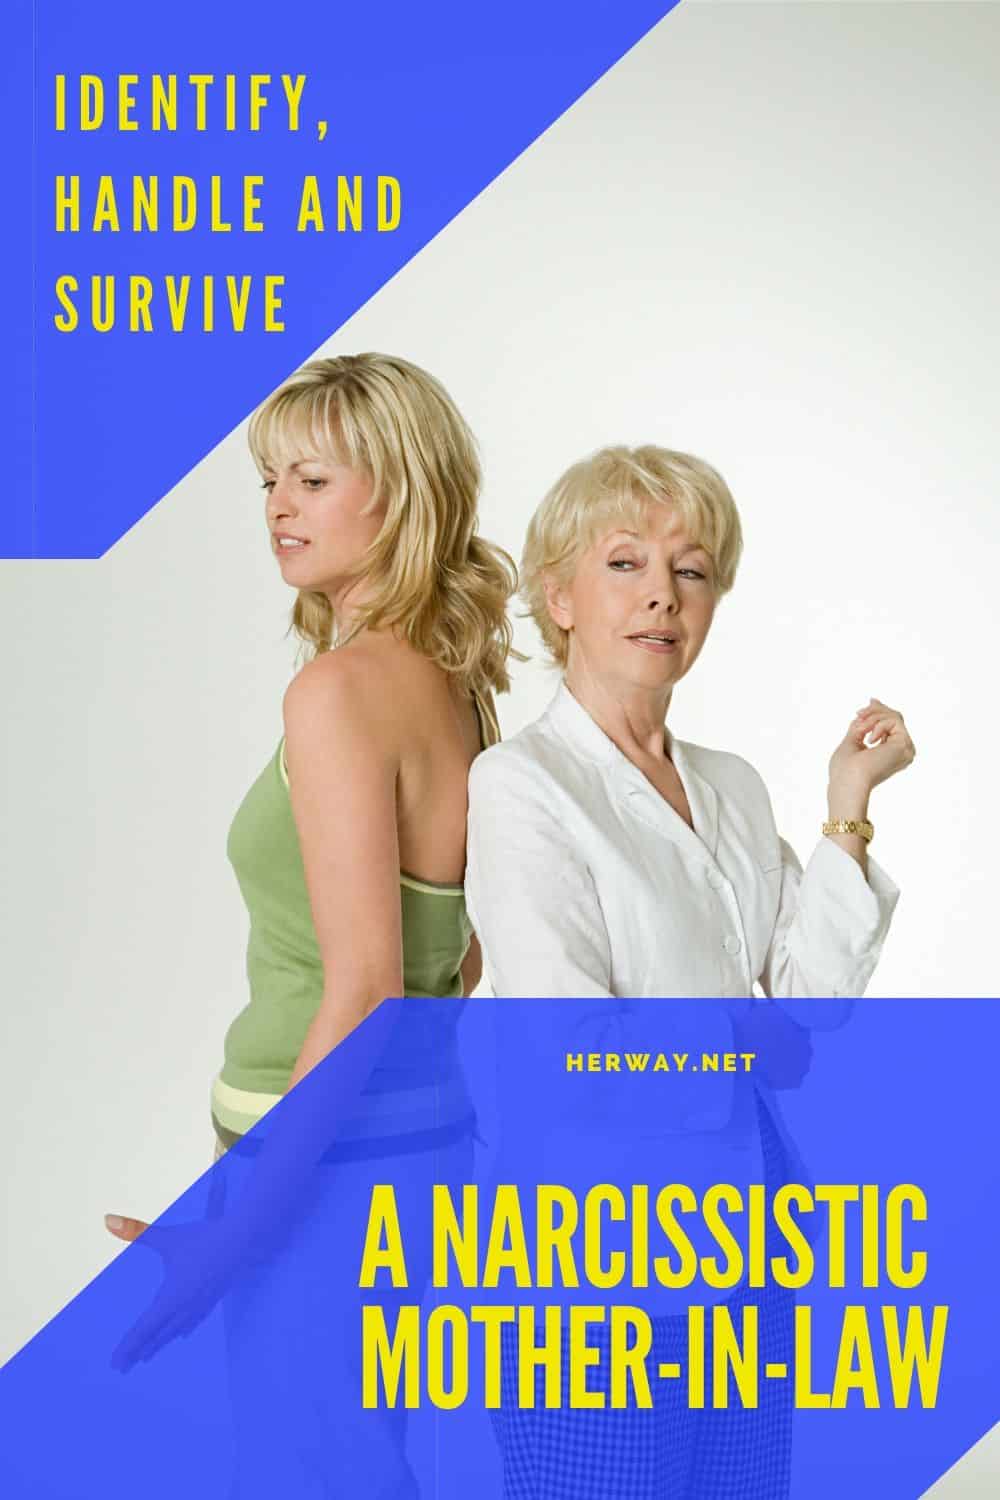 Identify, Handle And Survive A Narcissistic Mother-In-Law